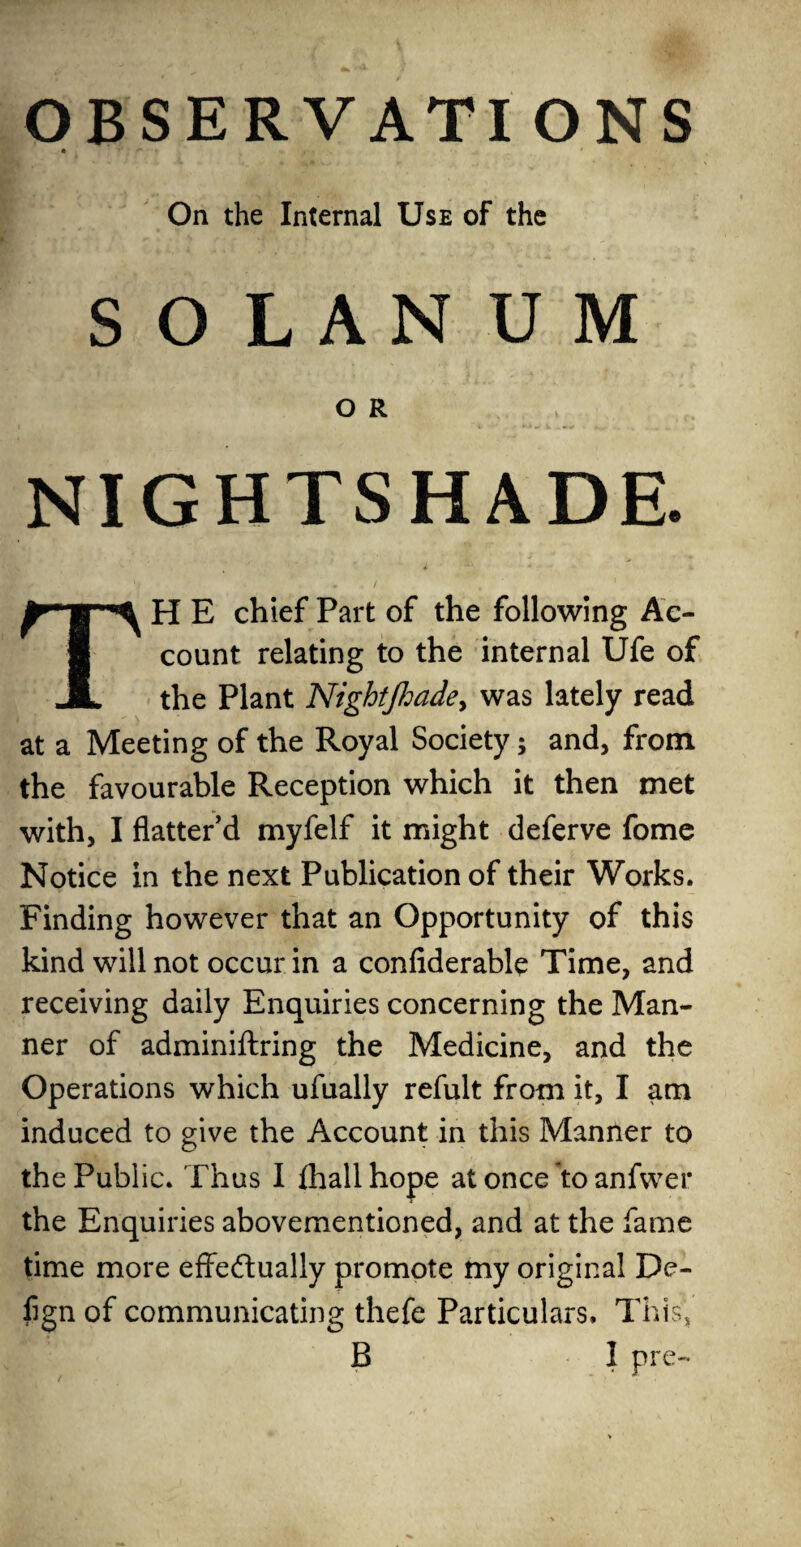 OBSERVATIONS • ' On the Internal Use of the S O L A N U M O R NIGHTSHADE. TH E chief Part of the following Ac¬ count relating to the internal Ufe of the Plant Nightjhade, was lately read at a Meeting of the Royal Society; and, from the favourable Reception which it then met with, I flatter'd myfelf it might deferve fome Notice in the next Publication of their Works. Finding however that an Opportunity of this kind will not occur in a confiderable Time, and receiving daily Enquiries concerning the Man¬ ner of adminiftring the Medicine, and the Operations which ufually refult from it, I am induced to give the Account in this Manner to the Public. Thus I fhall hope at once to anfwer the Enquiries abovementioned, and at the fame time more effectually promote my original De- lign of communicating thefe Particulars. This,